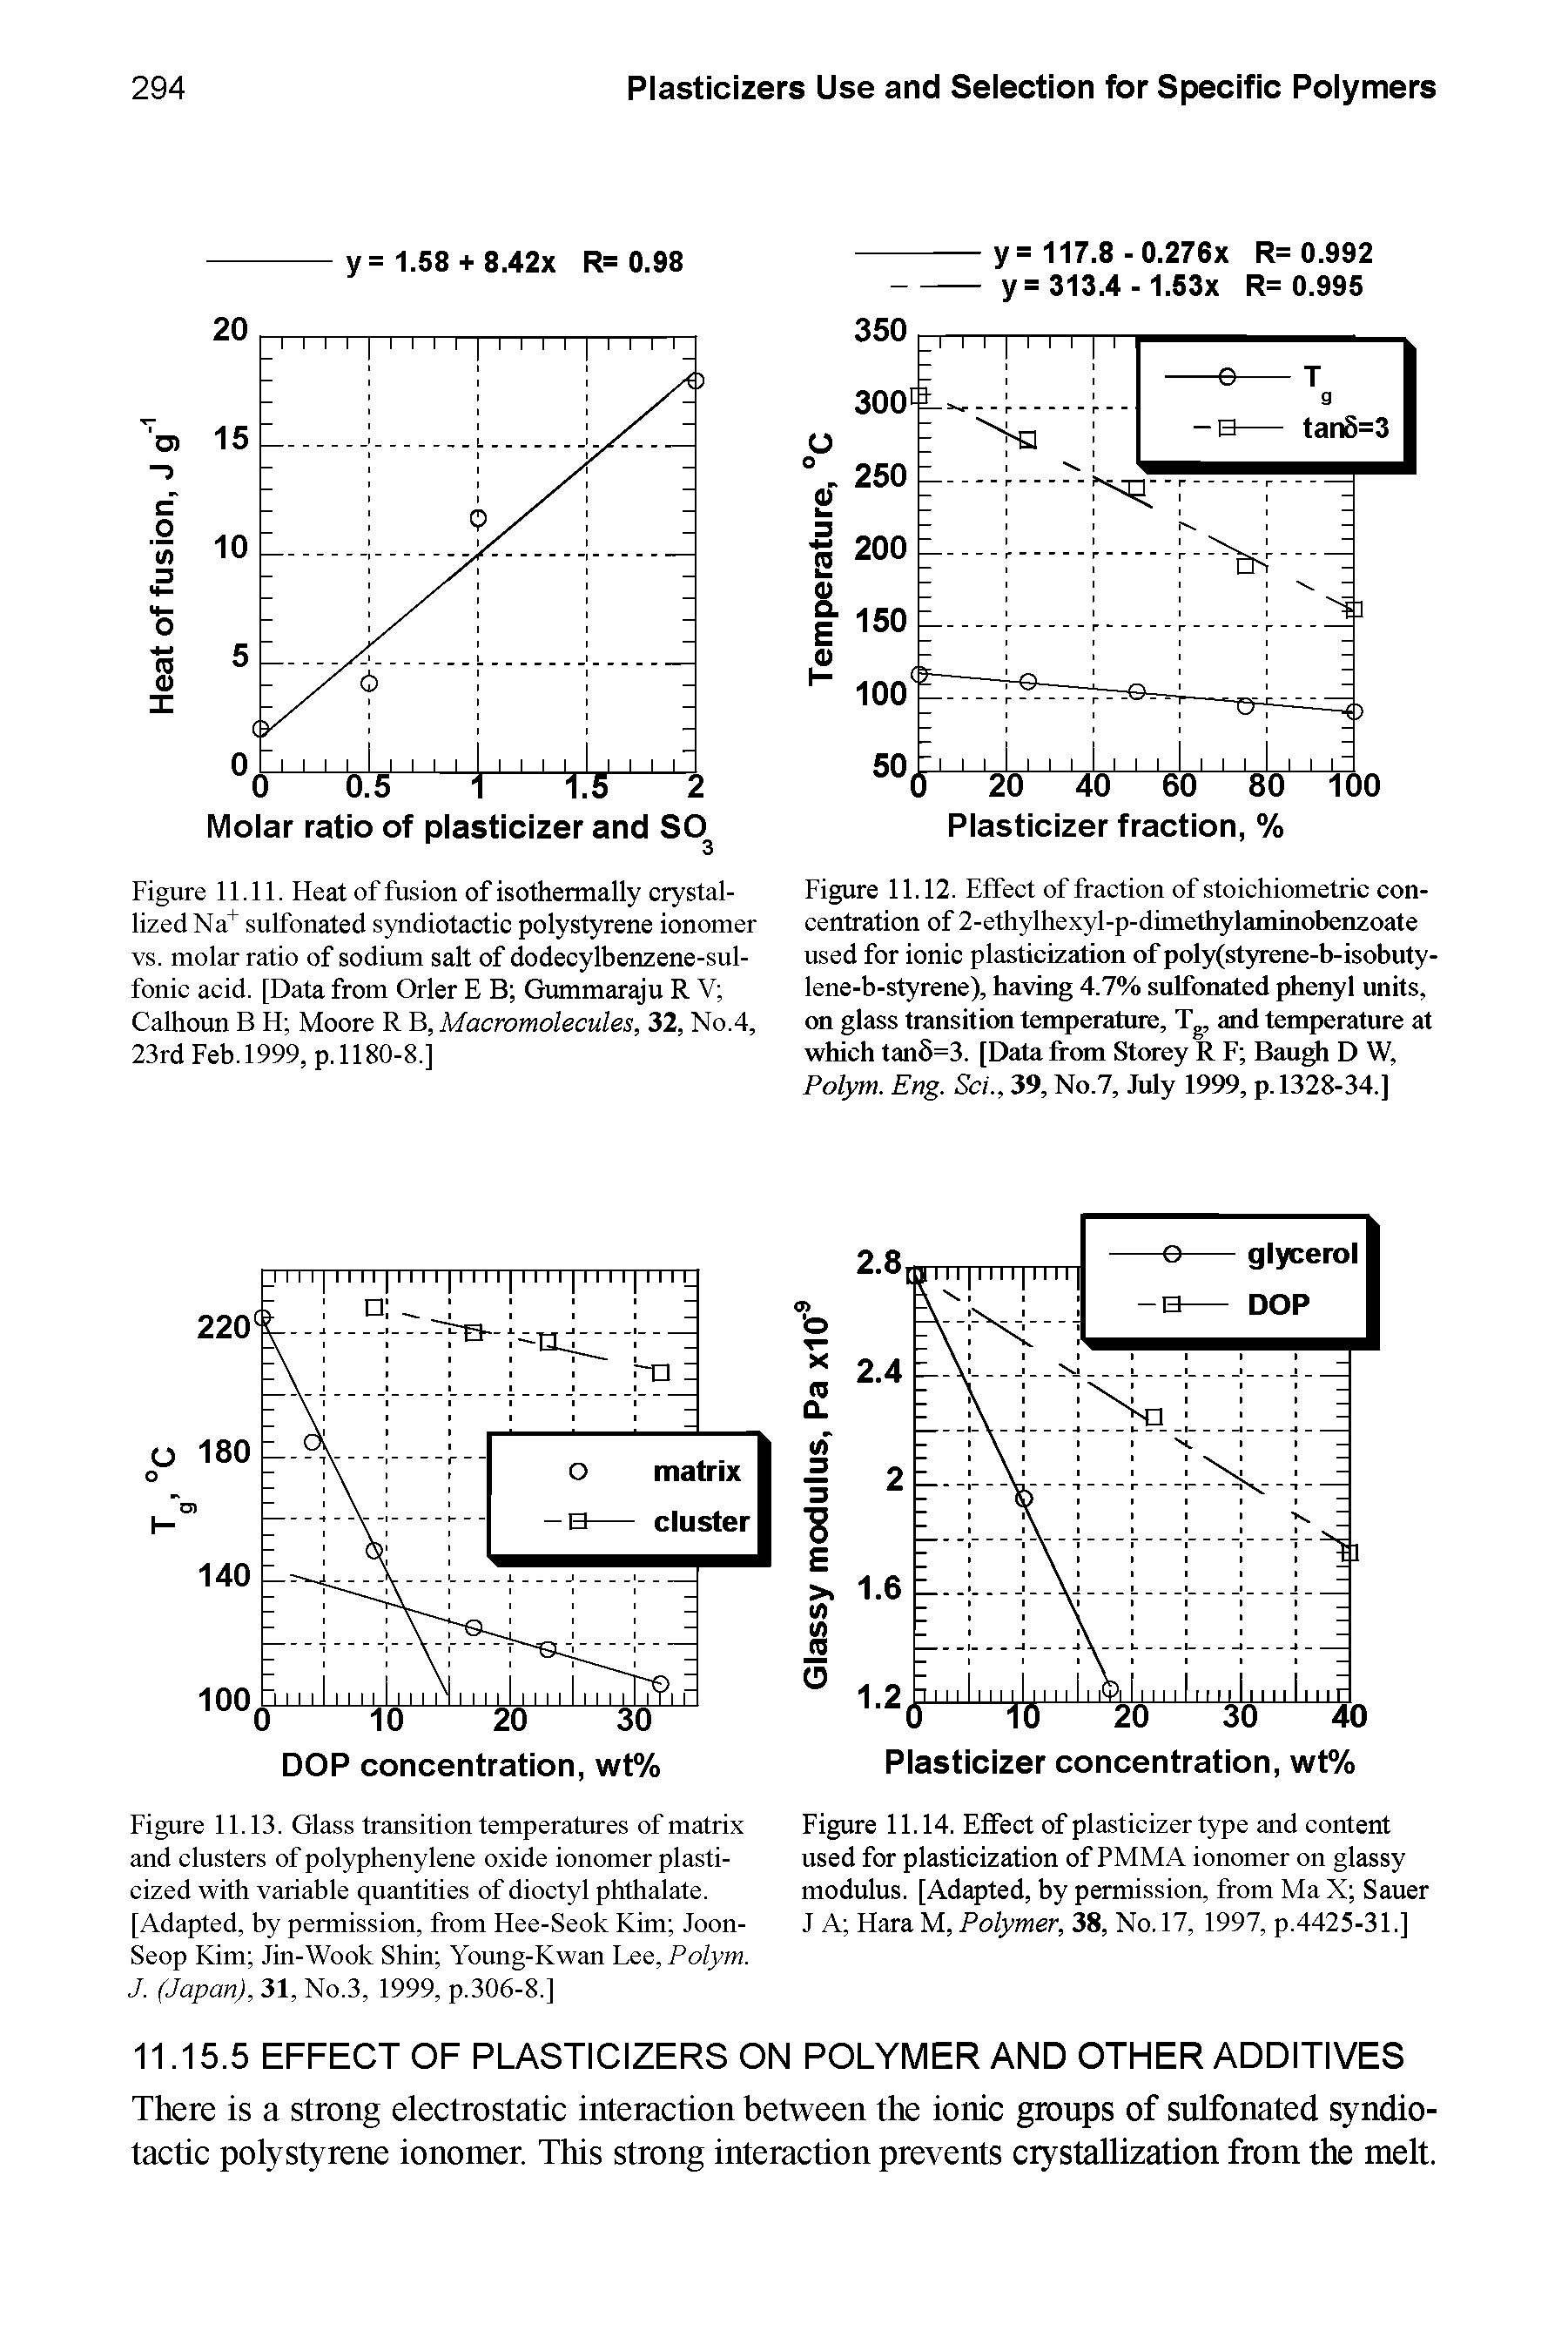 Figure 11.12. Effect of fraction of stoichiometric concentration of 2-ethylhexyl-p-dimethylaminobenzoate used for ionic plasticization of poly(styrene-b-isobuty-lene-b-styrene), having 4.7% sulfonated phenyl units, on glass transition temperature, Tg, and temperature at which tan6=3. [Data from Storey R F Bau D W, Polym. Eng. Sci., 39, No.7, July 1999, p. 1328-34.]...